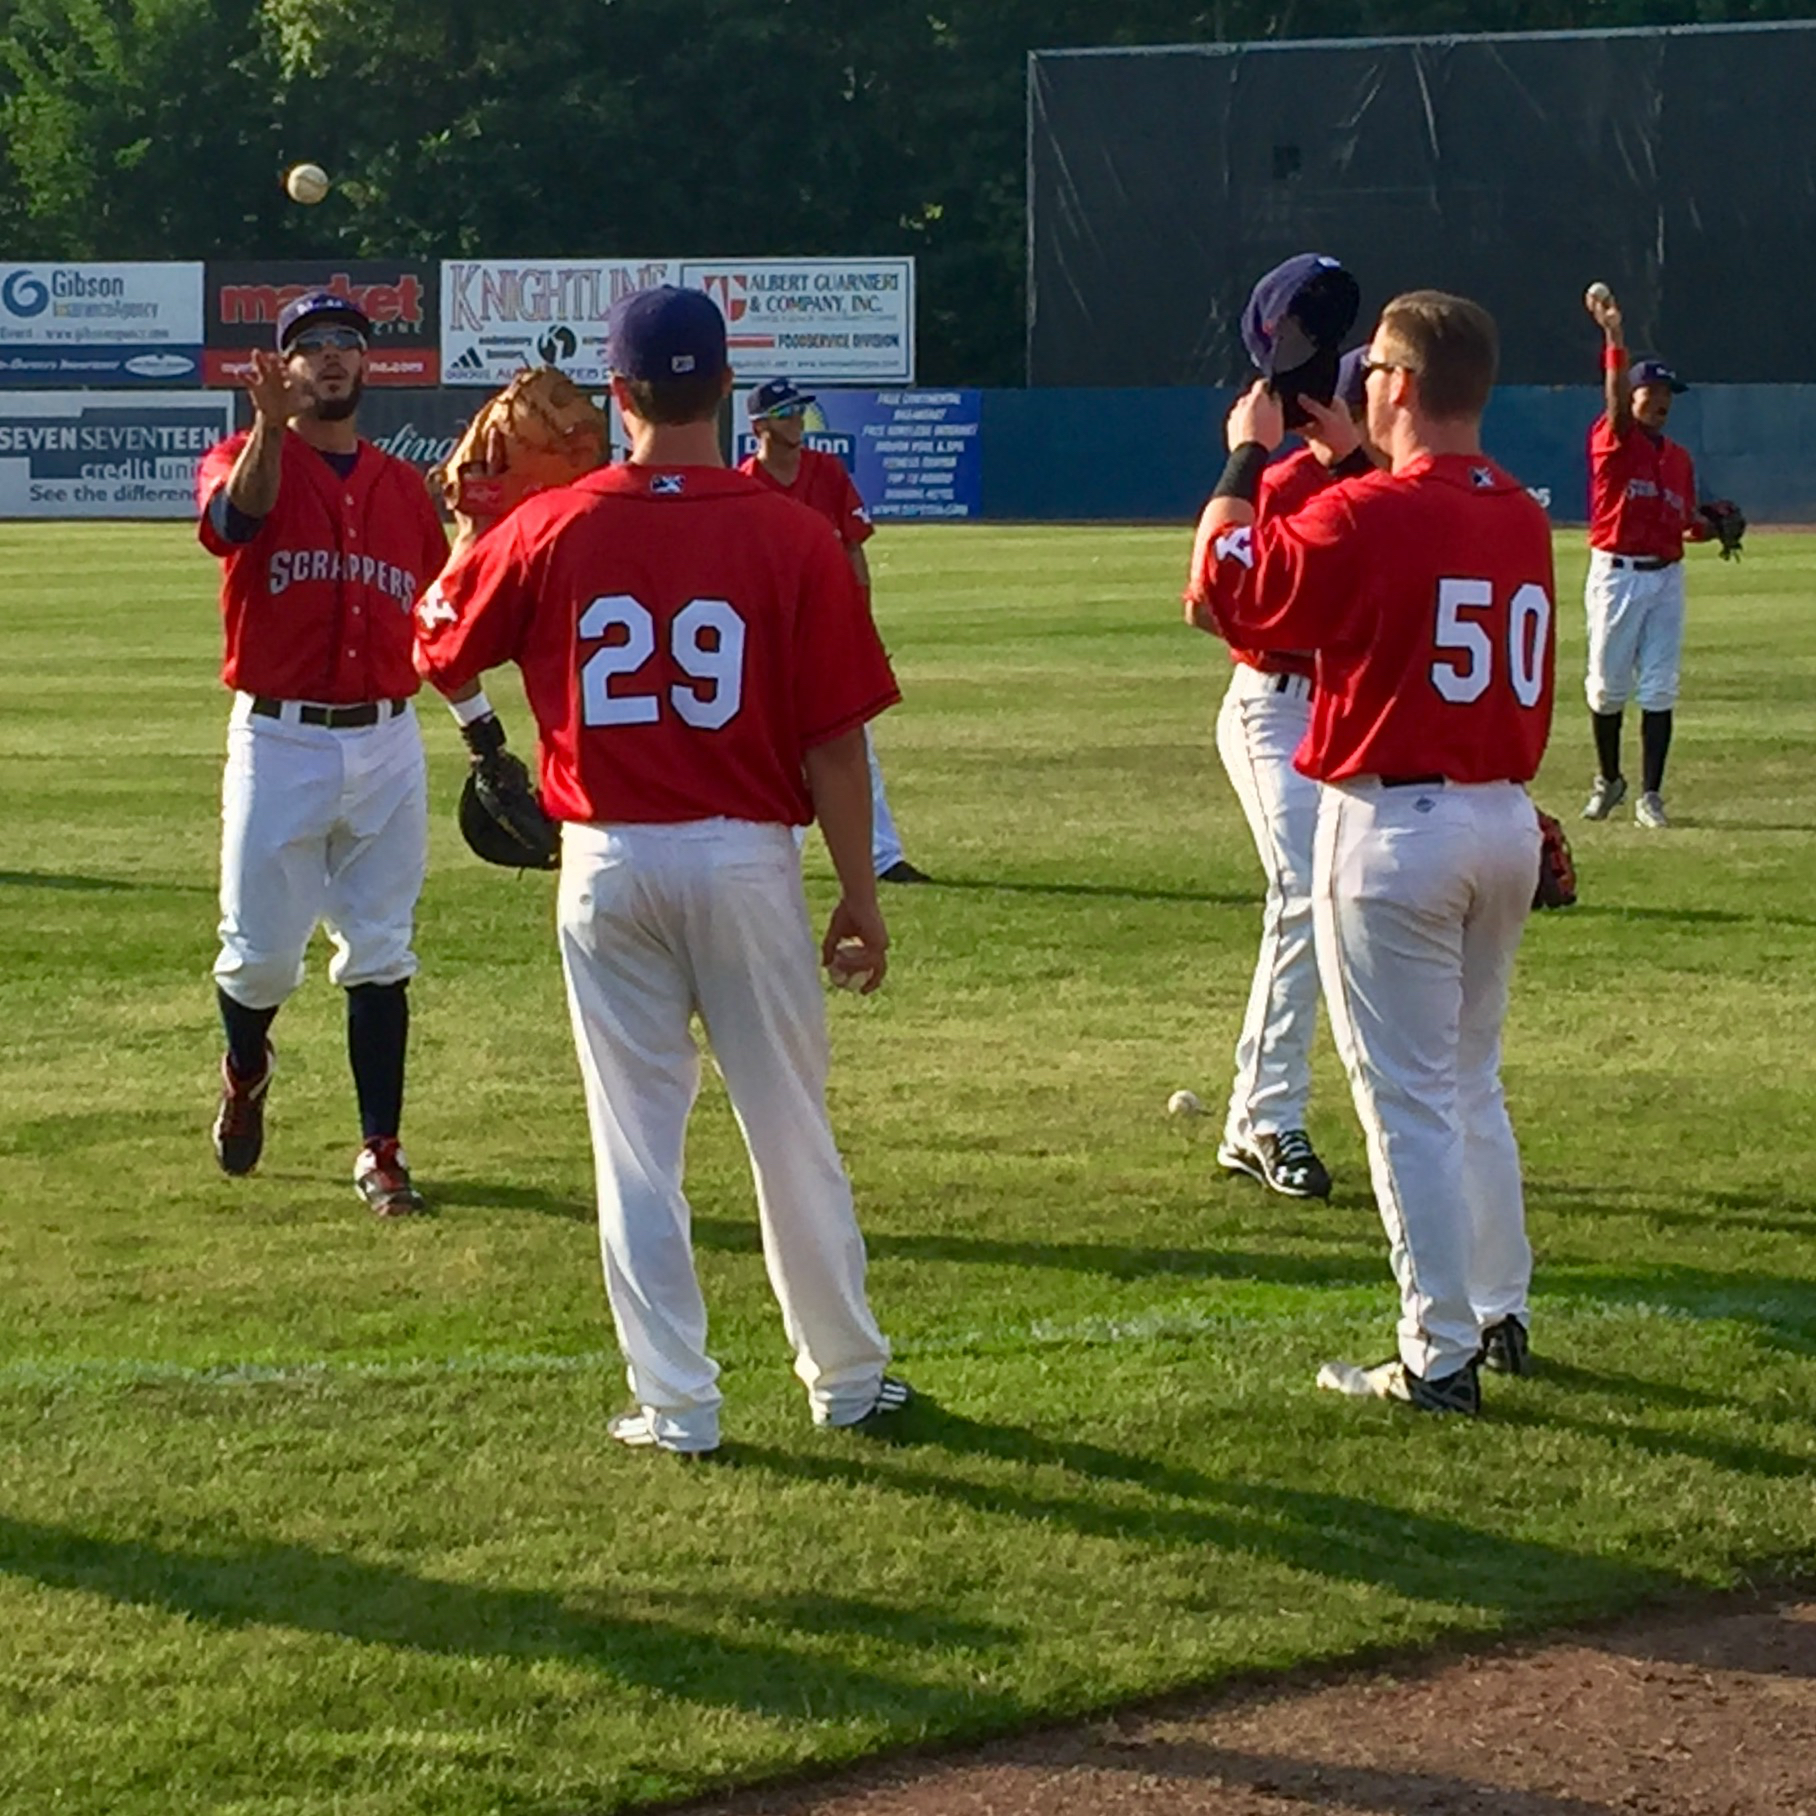 Youngstown State Night: Mahoning Valley Scrappers — OT Sports